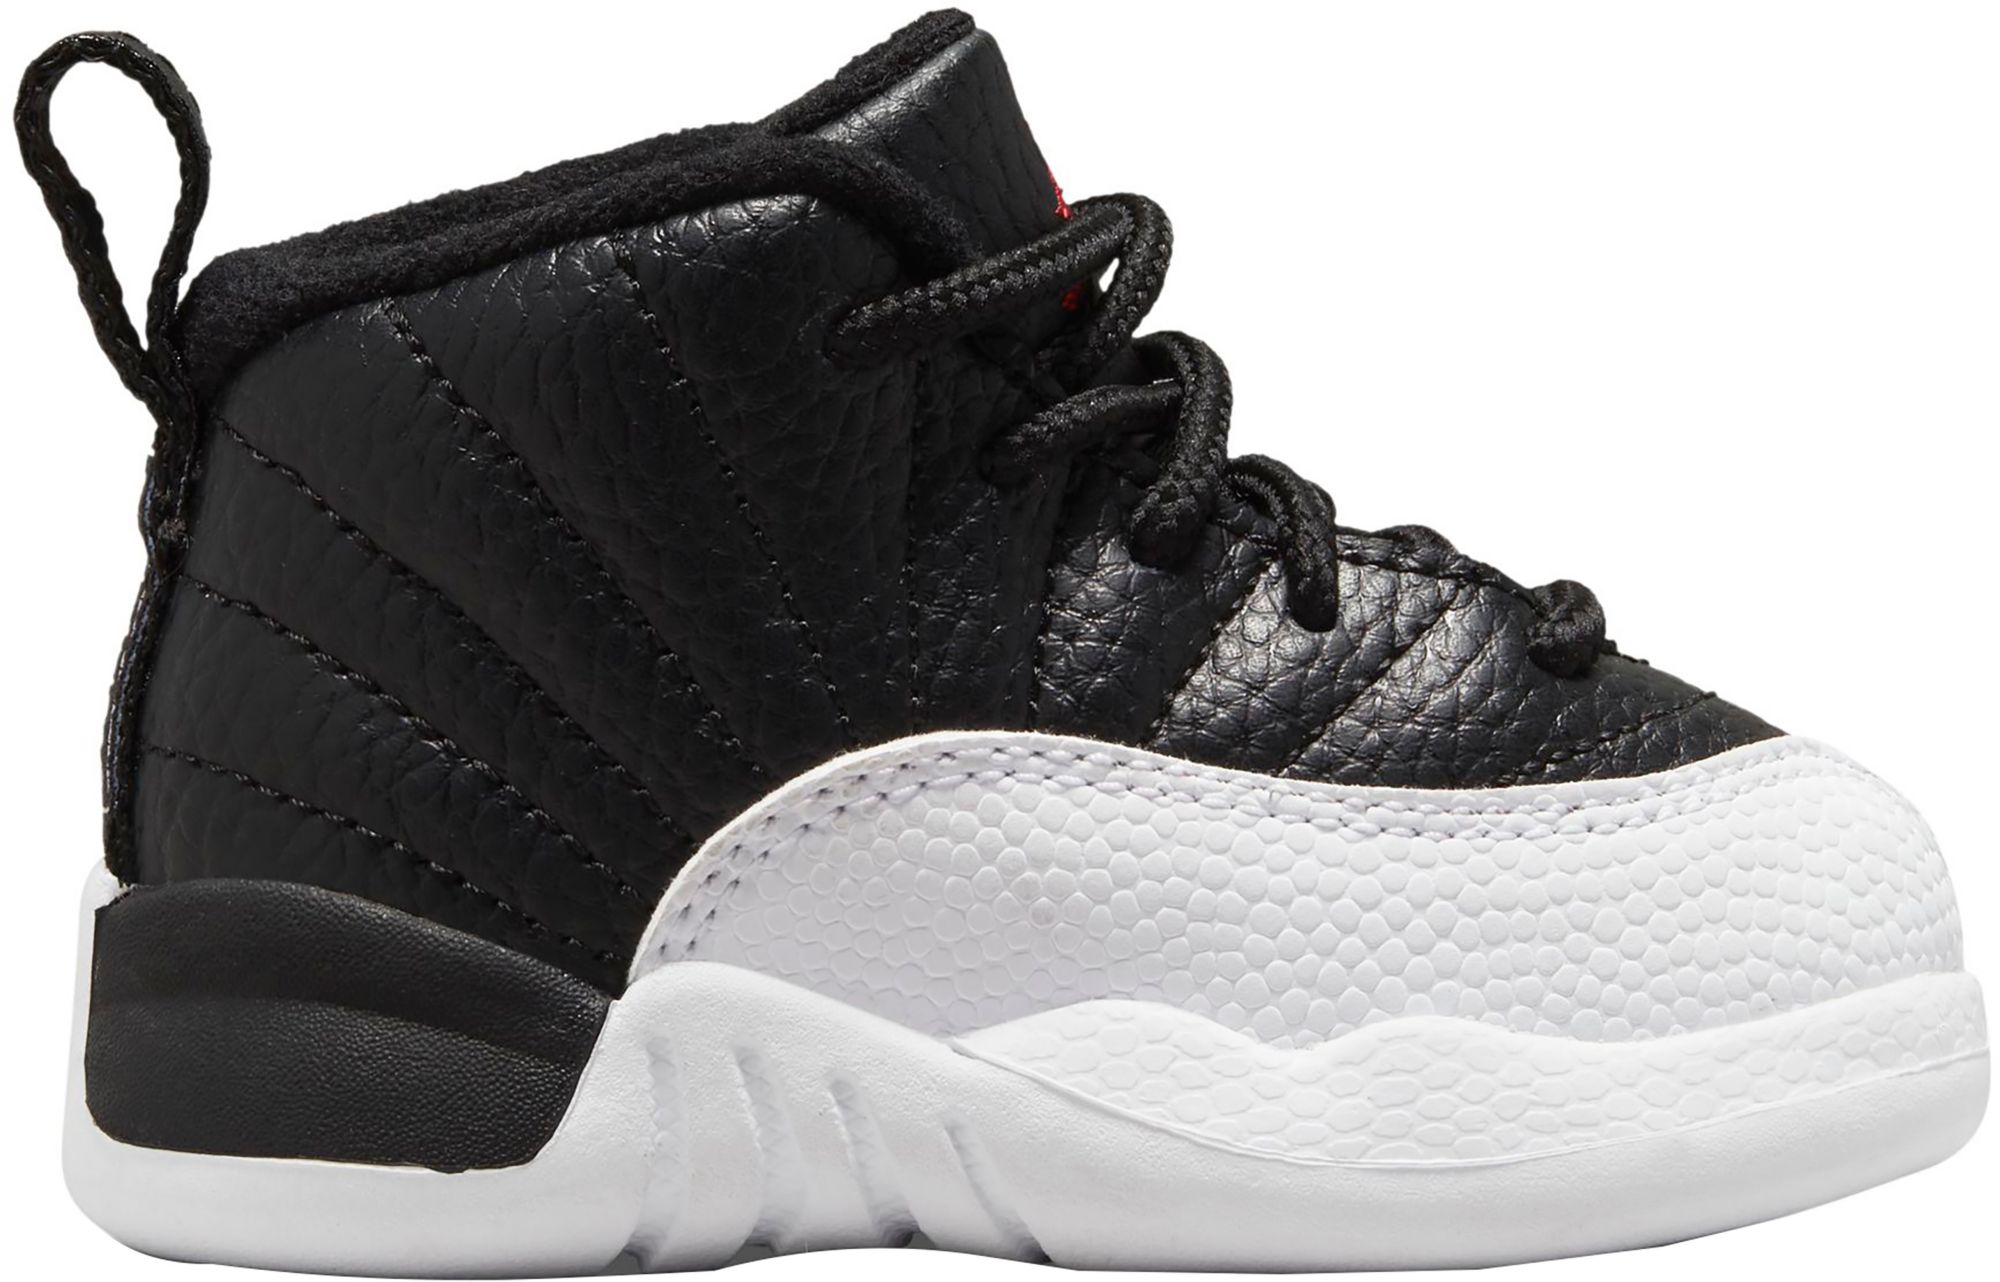 black and white jordans for toddlers